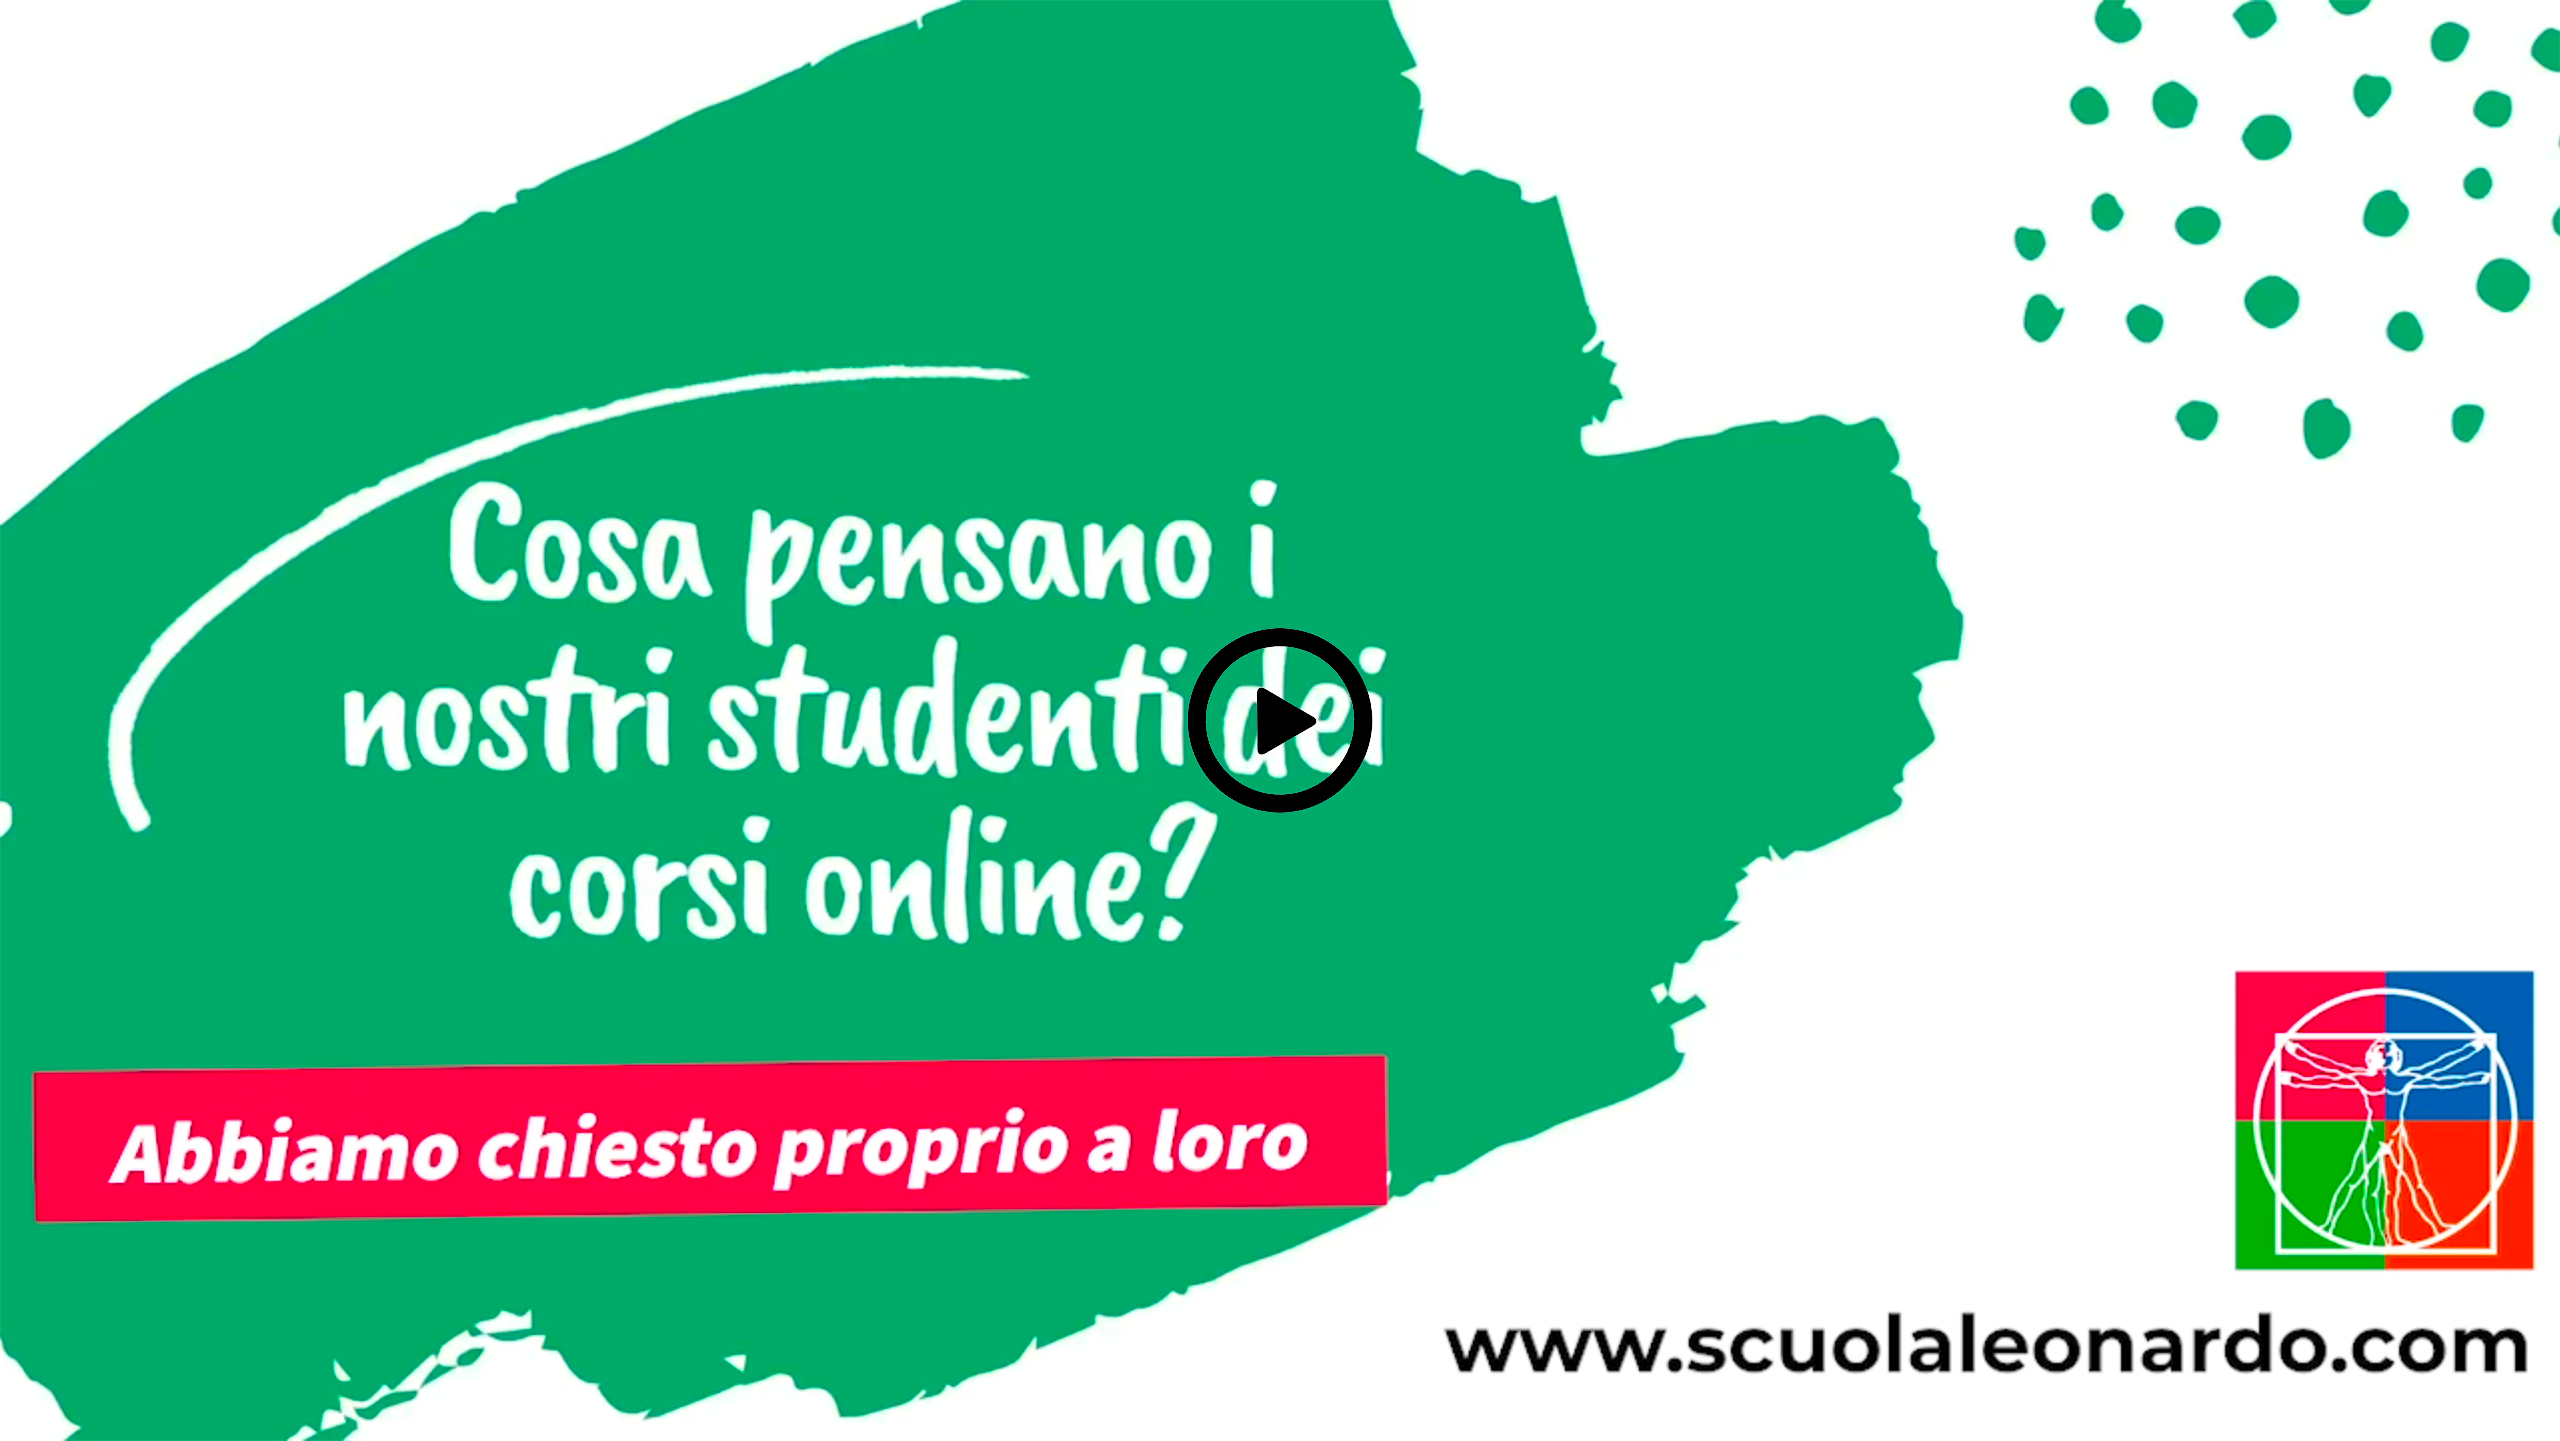 Watch the videos about our ITALIAN LANGUAGE ONLINE COURSES!